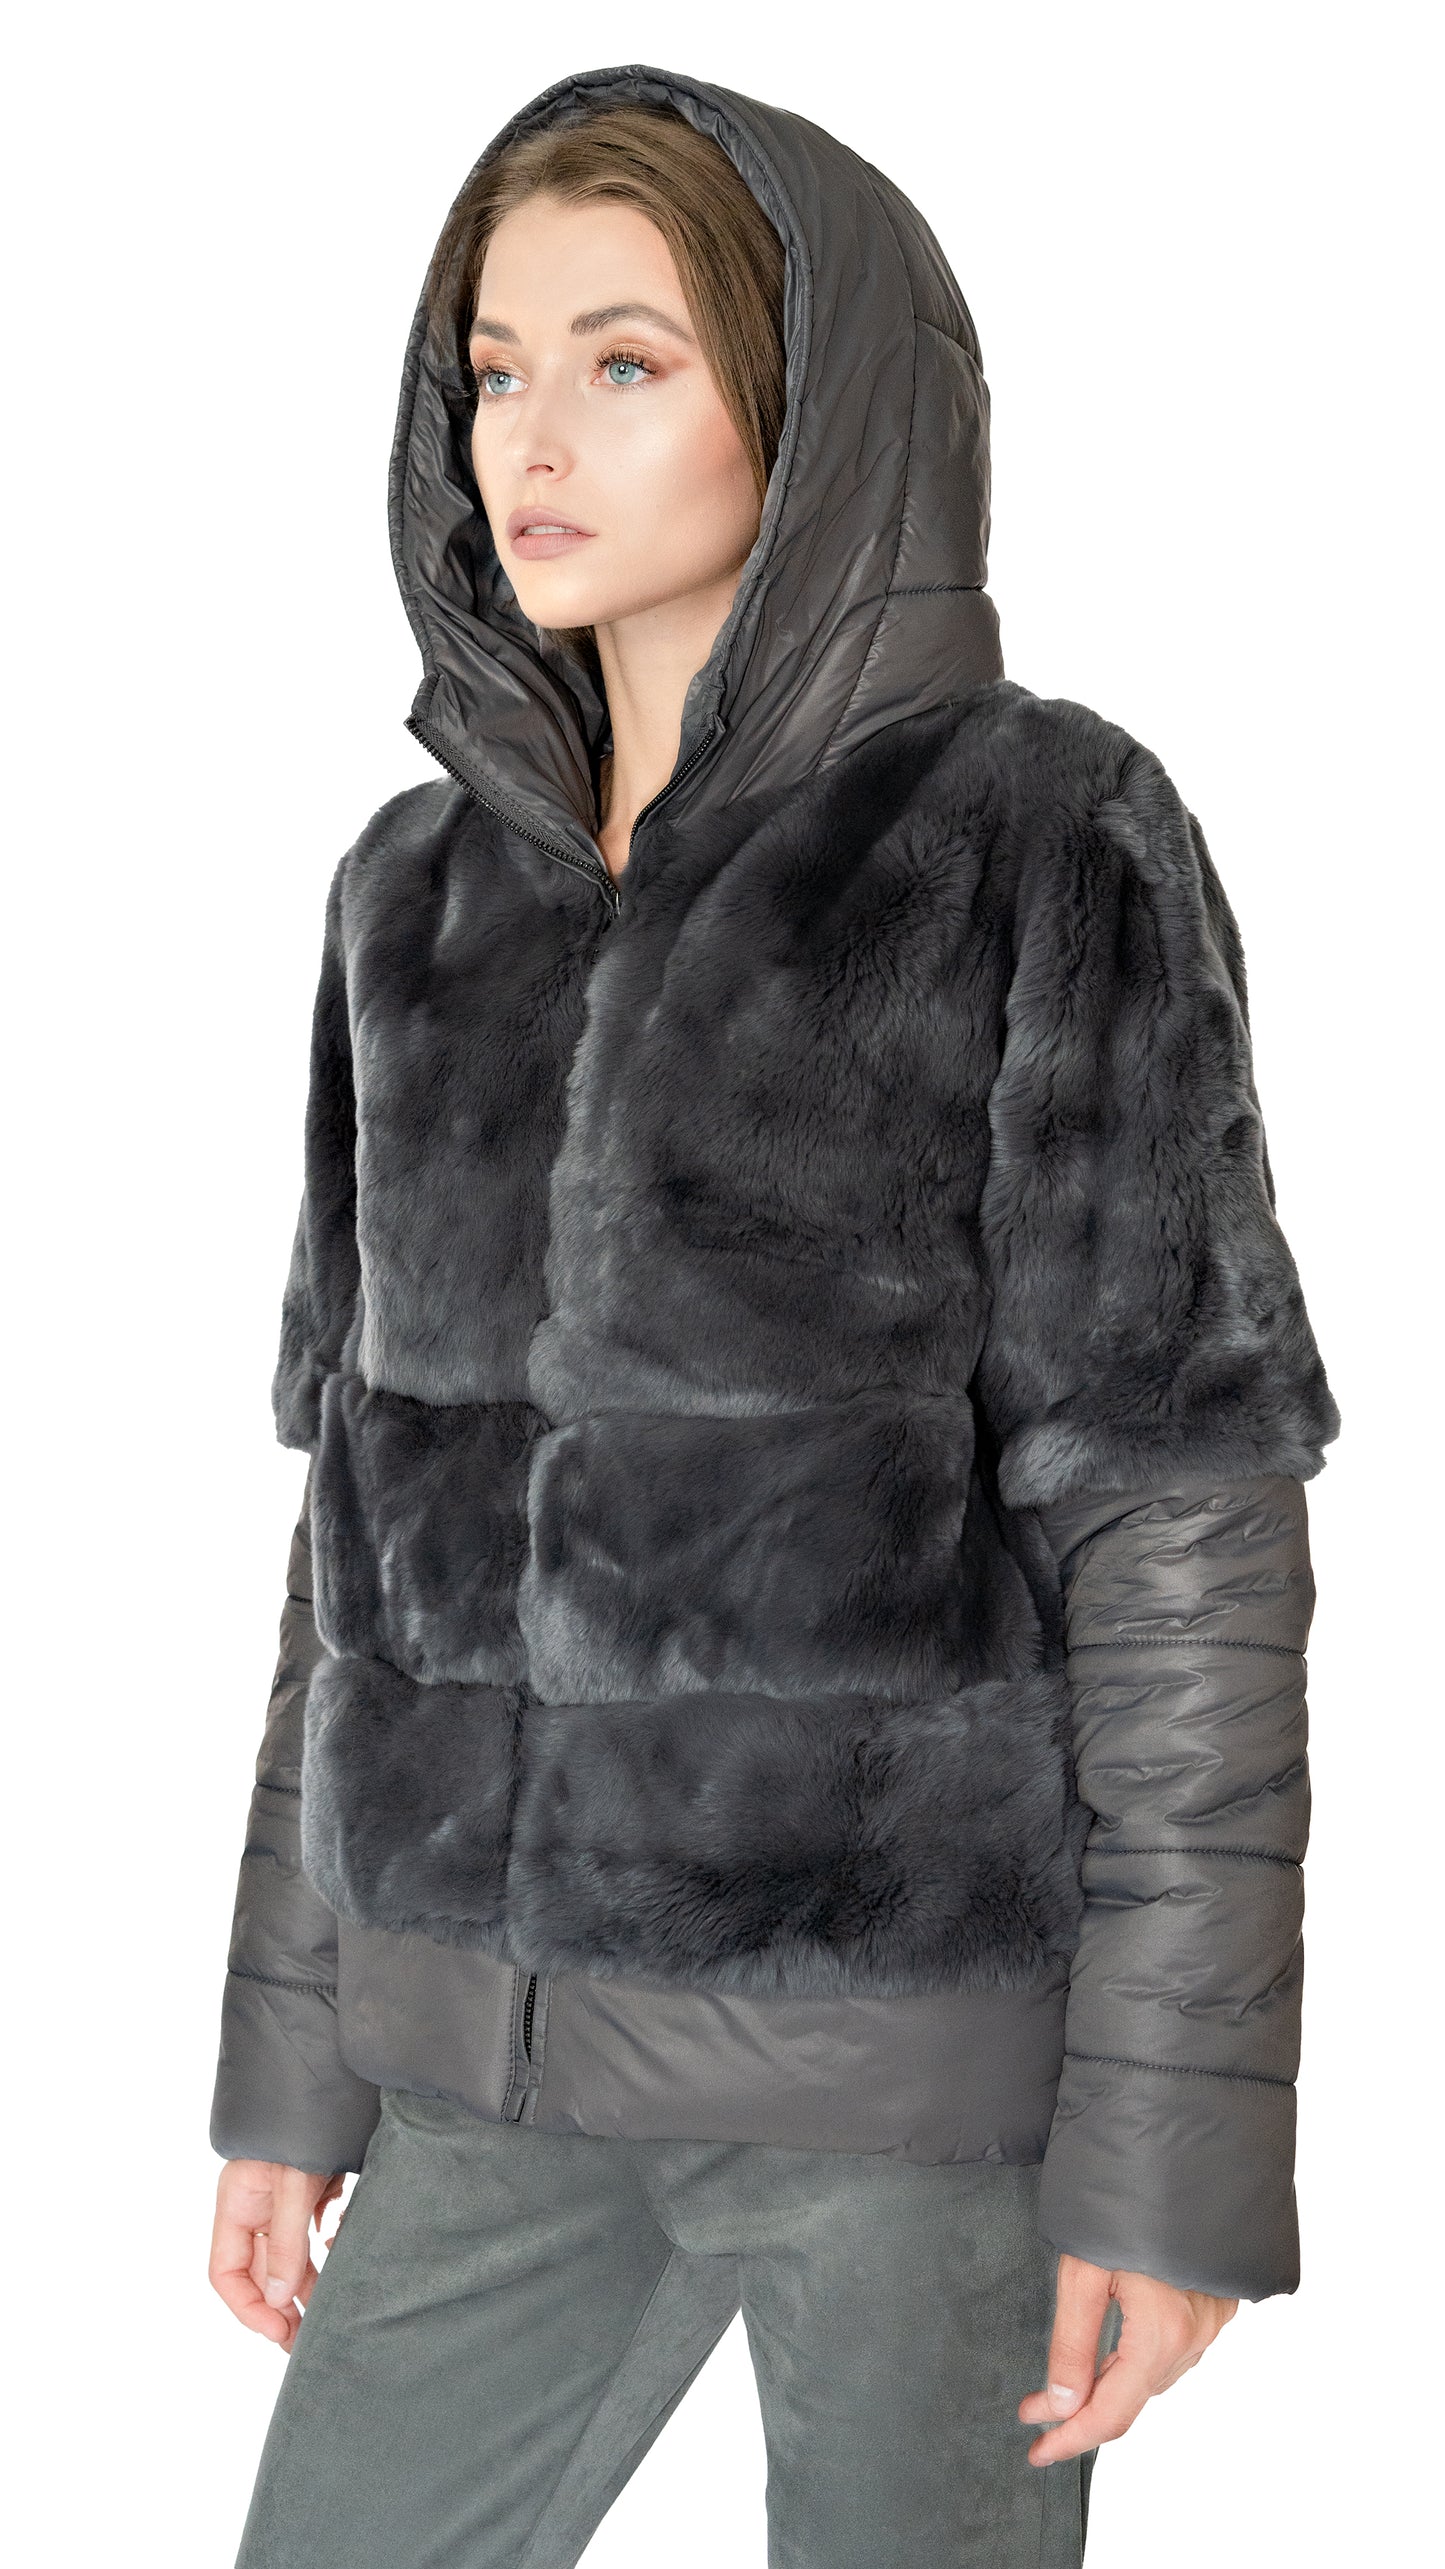 Linda Richards green rex fur and down jacket with hood and removable sleeves in grey color